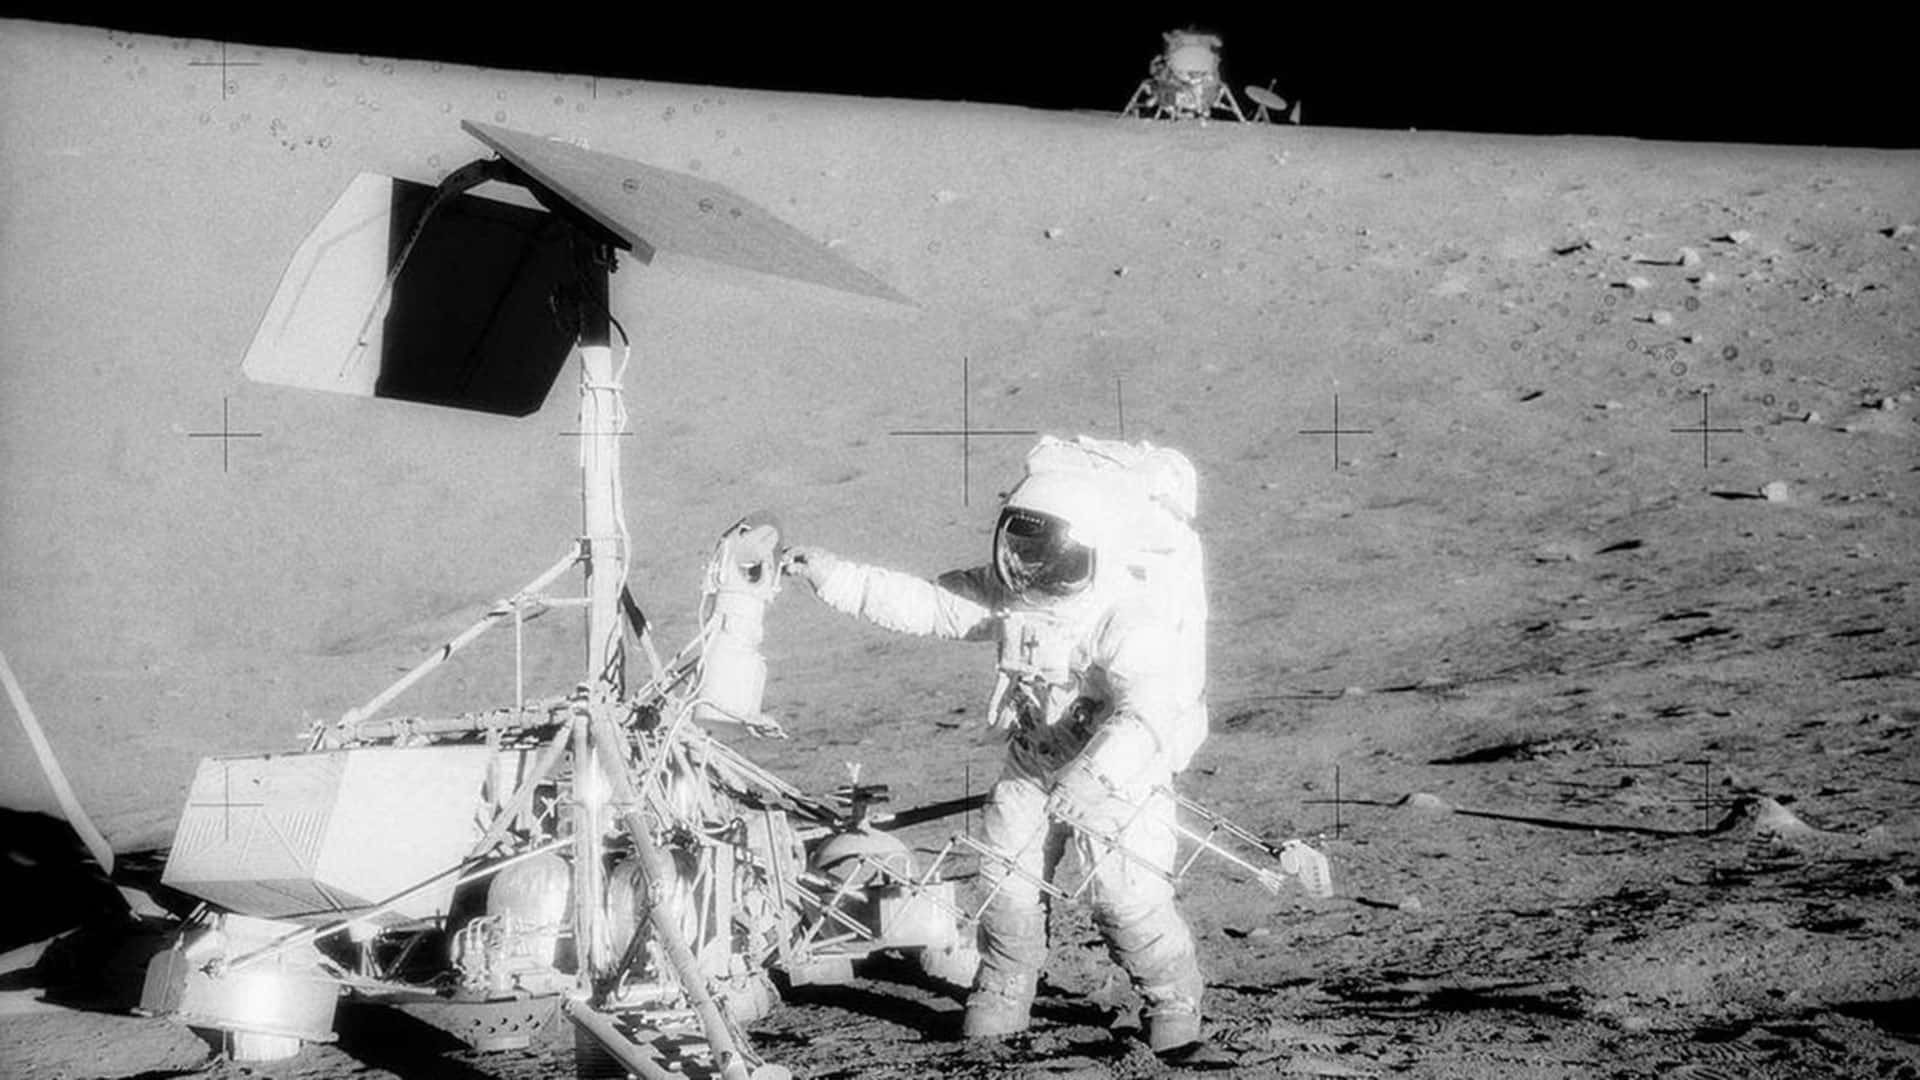 A Man In A Spacesuit Is Standing On The Moon